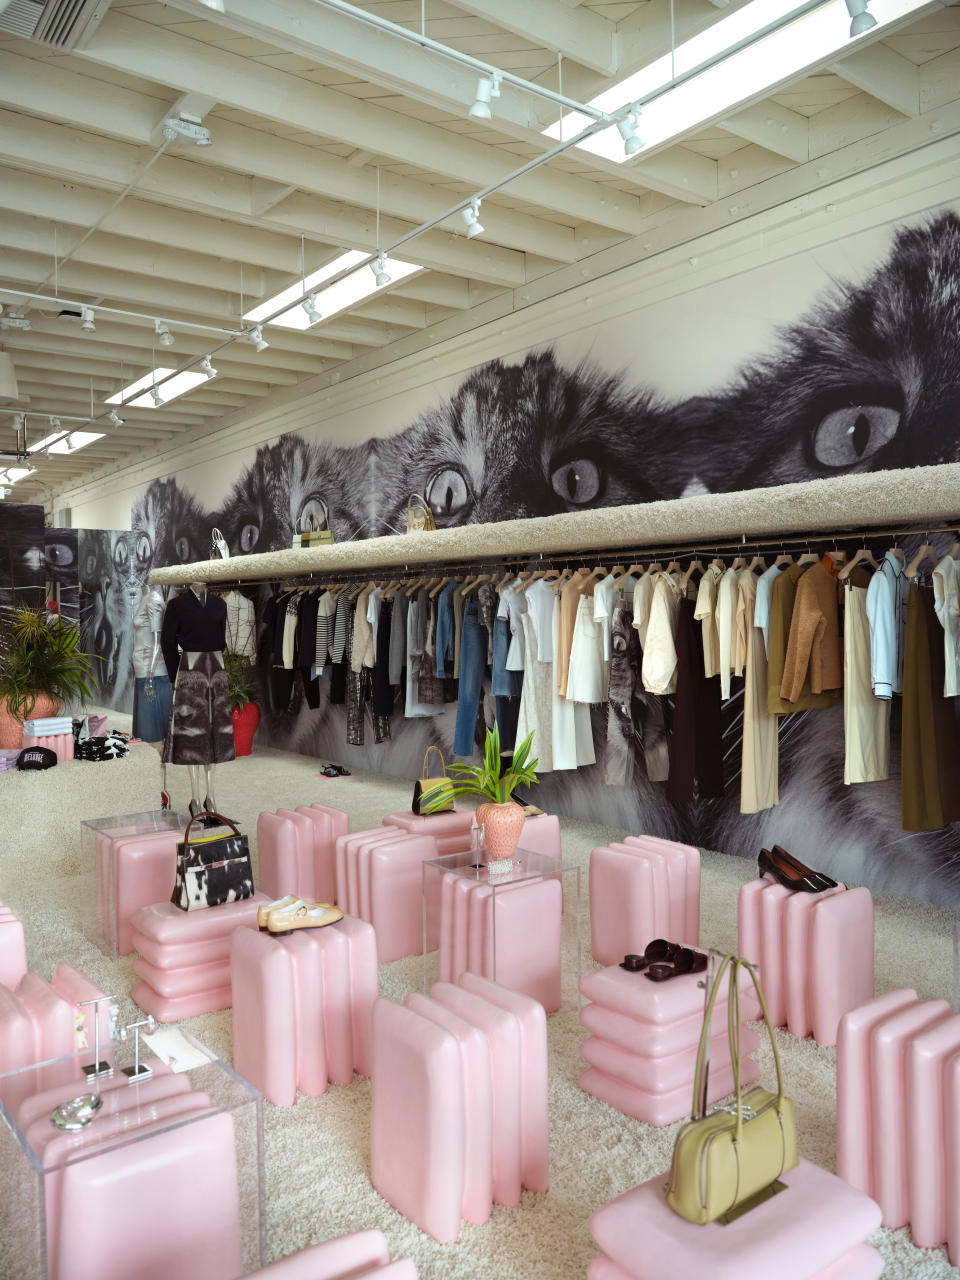 Tory Burch - Humberto Leon - Pop-up Store - Los Angeles - Interior - Clothes - Walter Schels Cat Imagery